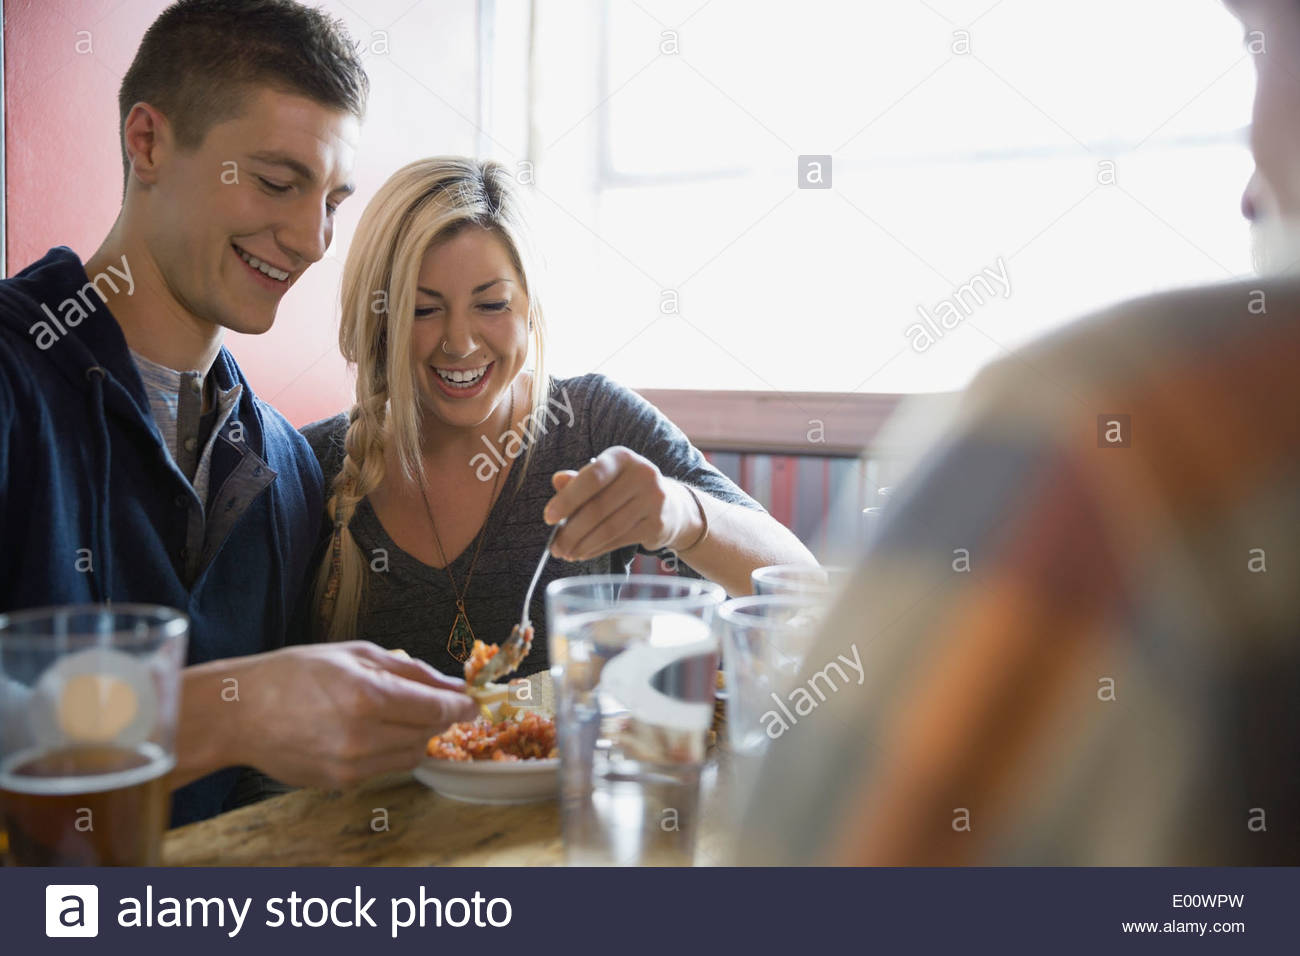 Couple sharing appetizer at brewery Stock Photo